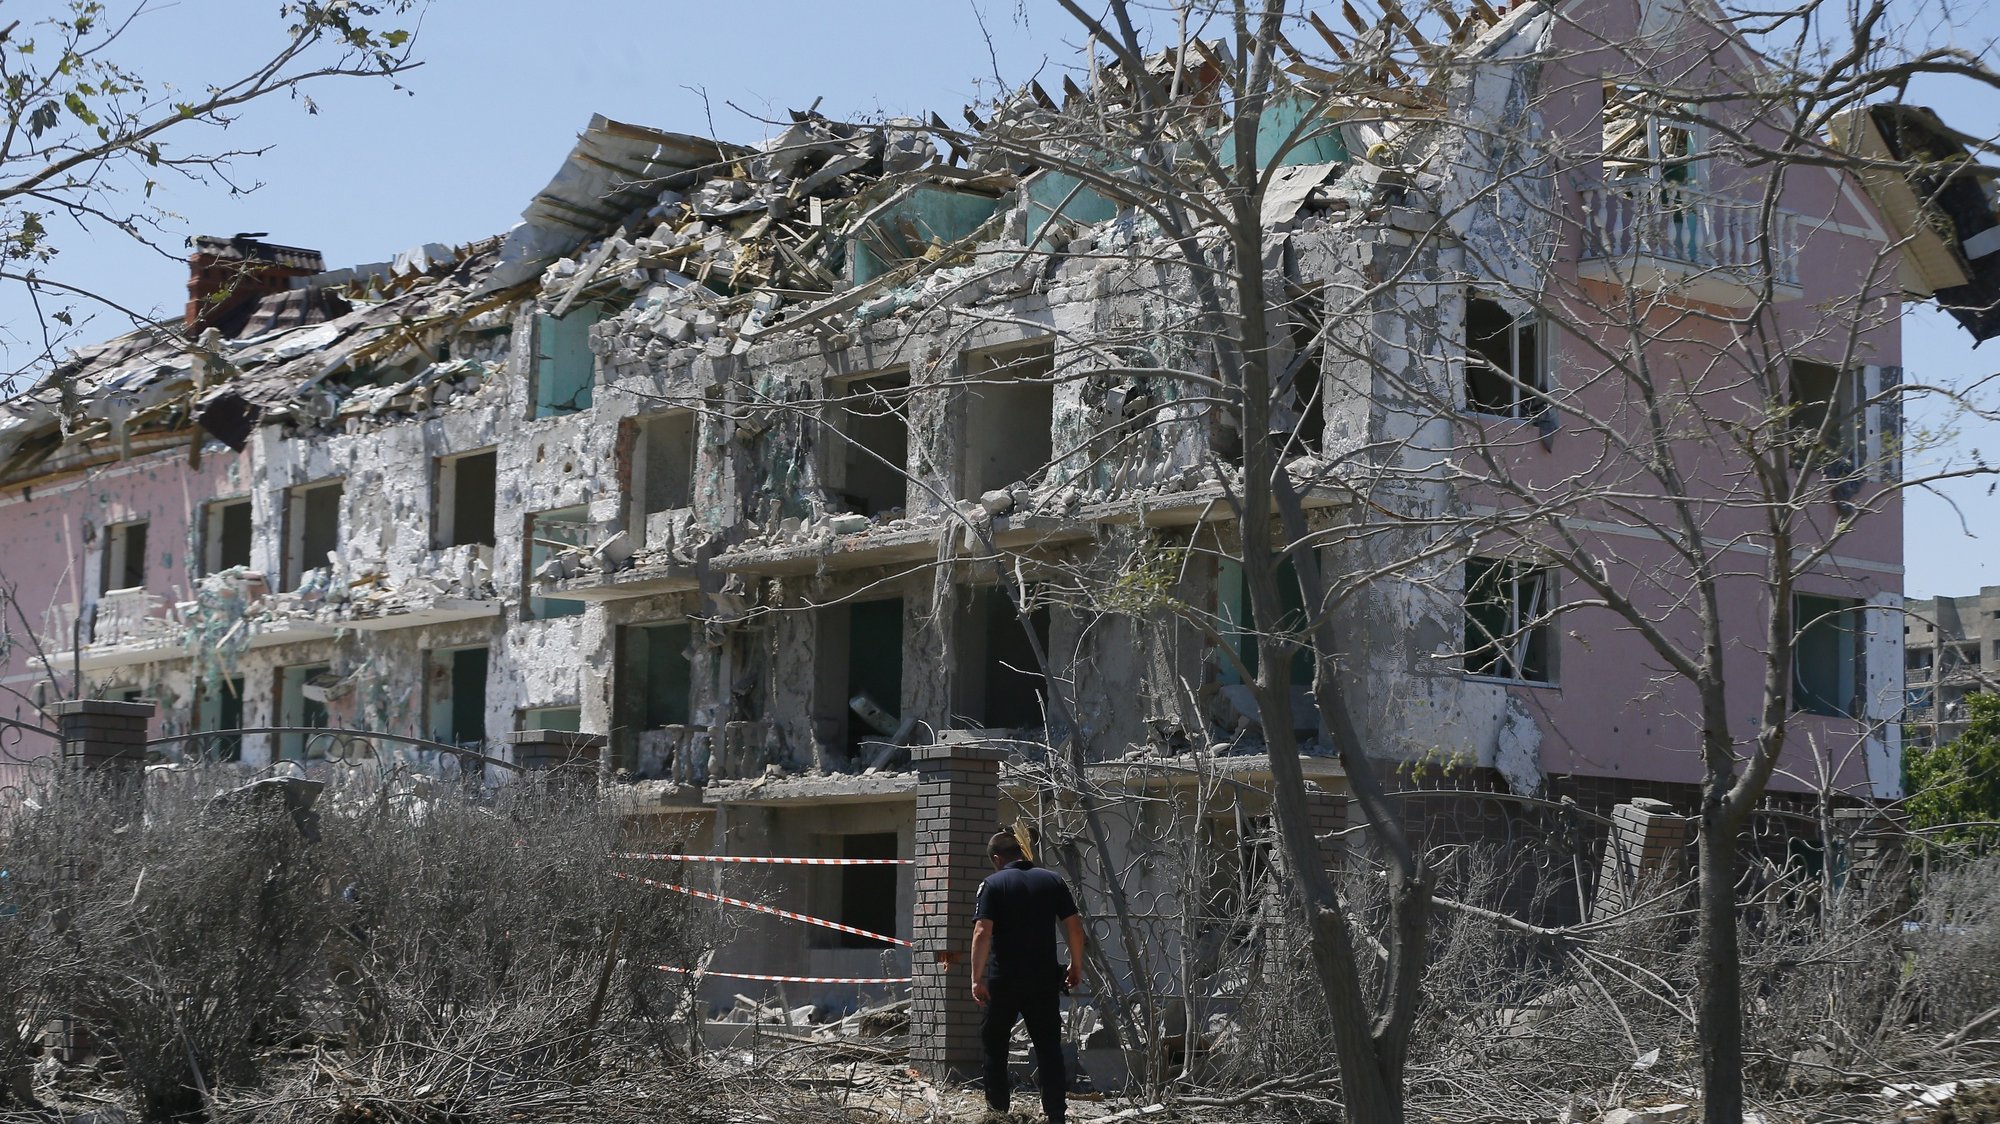 epa10046644 A destroyed holiday hotel after shelling hit the small town of Serhiivka near Odesa, southern Ukraine, 01 July 2022. At least 19 people were killed and 38 others injured, including six children, after overnight shelling hit a nine-story building and two holiday hotels in Serhiivka, Bilhorod-Dnistrovskyi district, Odesa region, the state emergency service said in a statement on 01 July.  EPA/STR